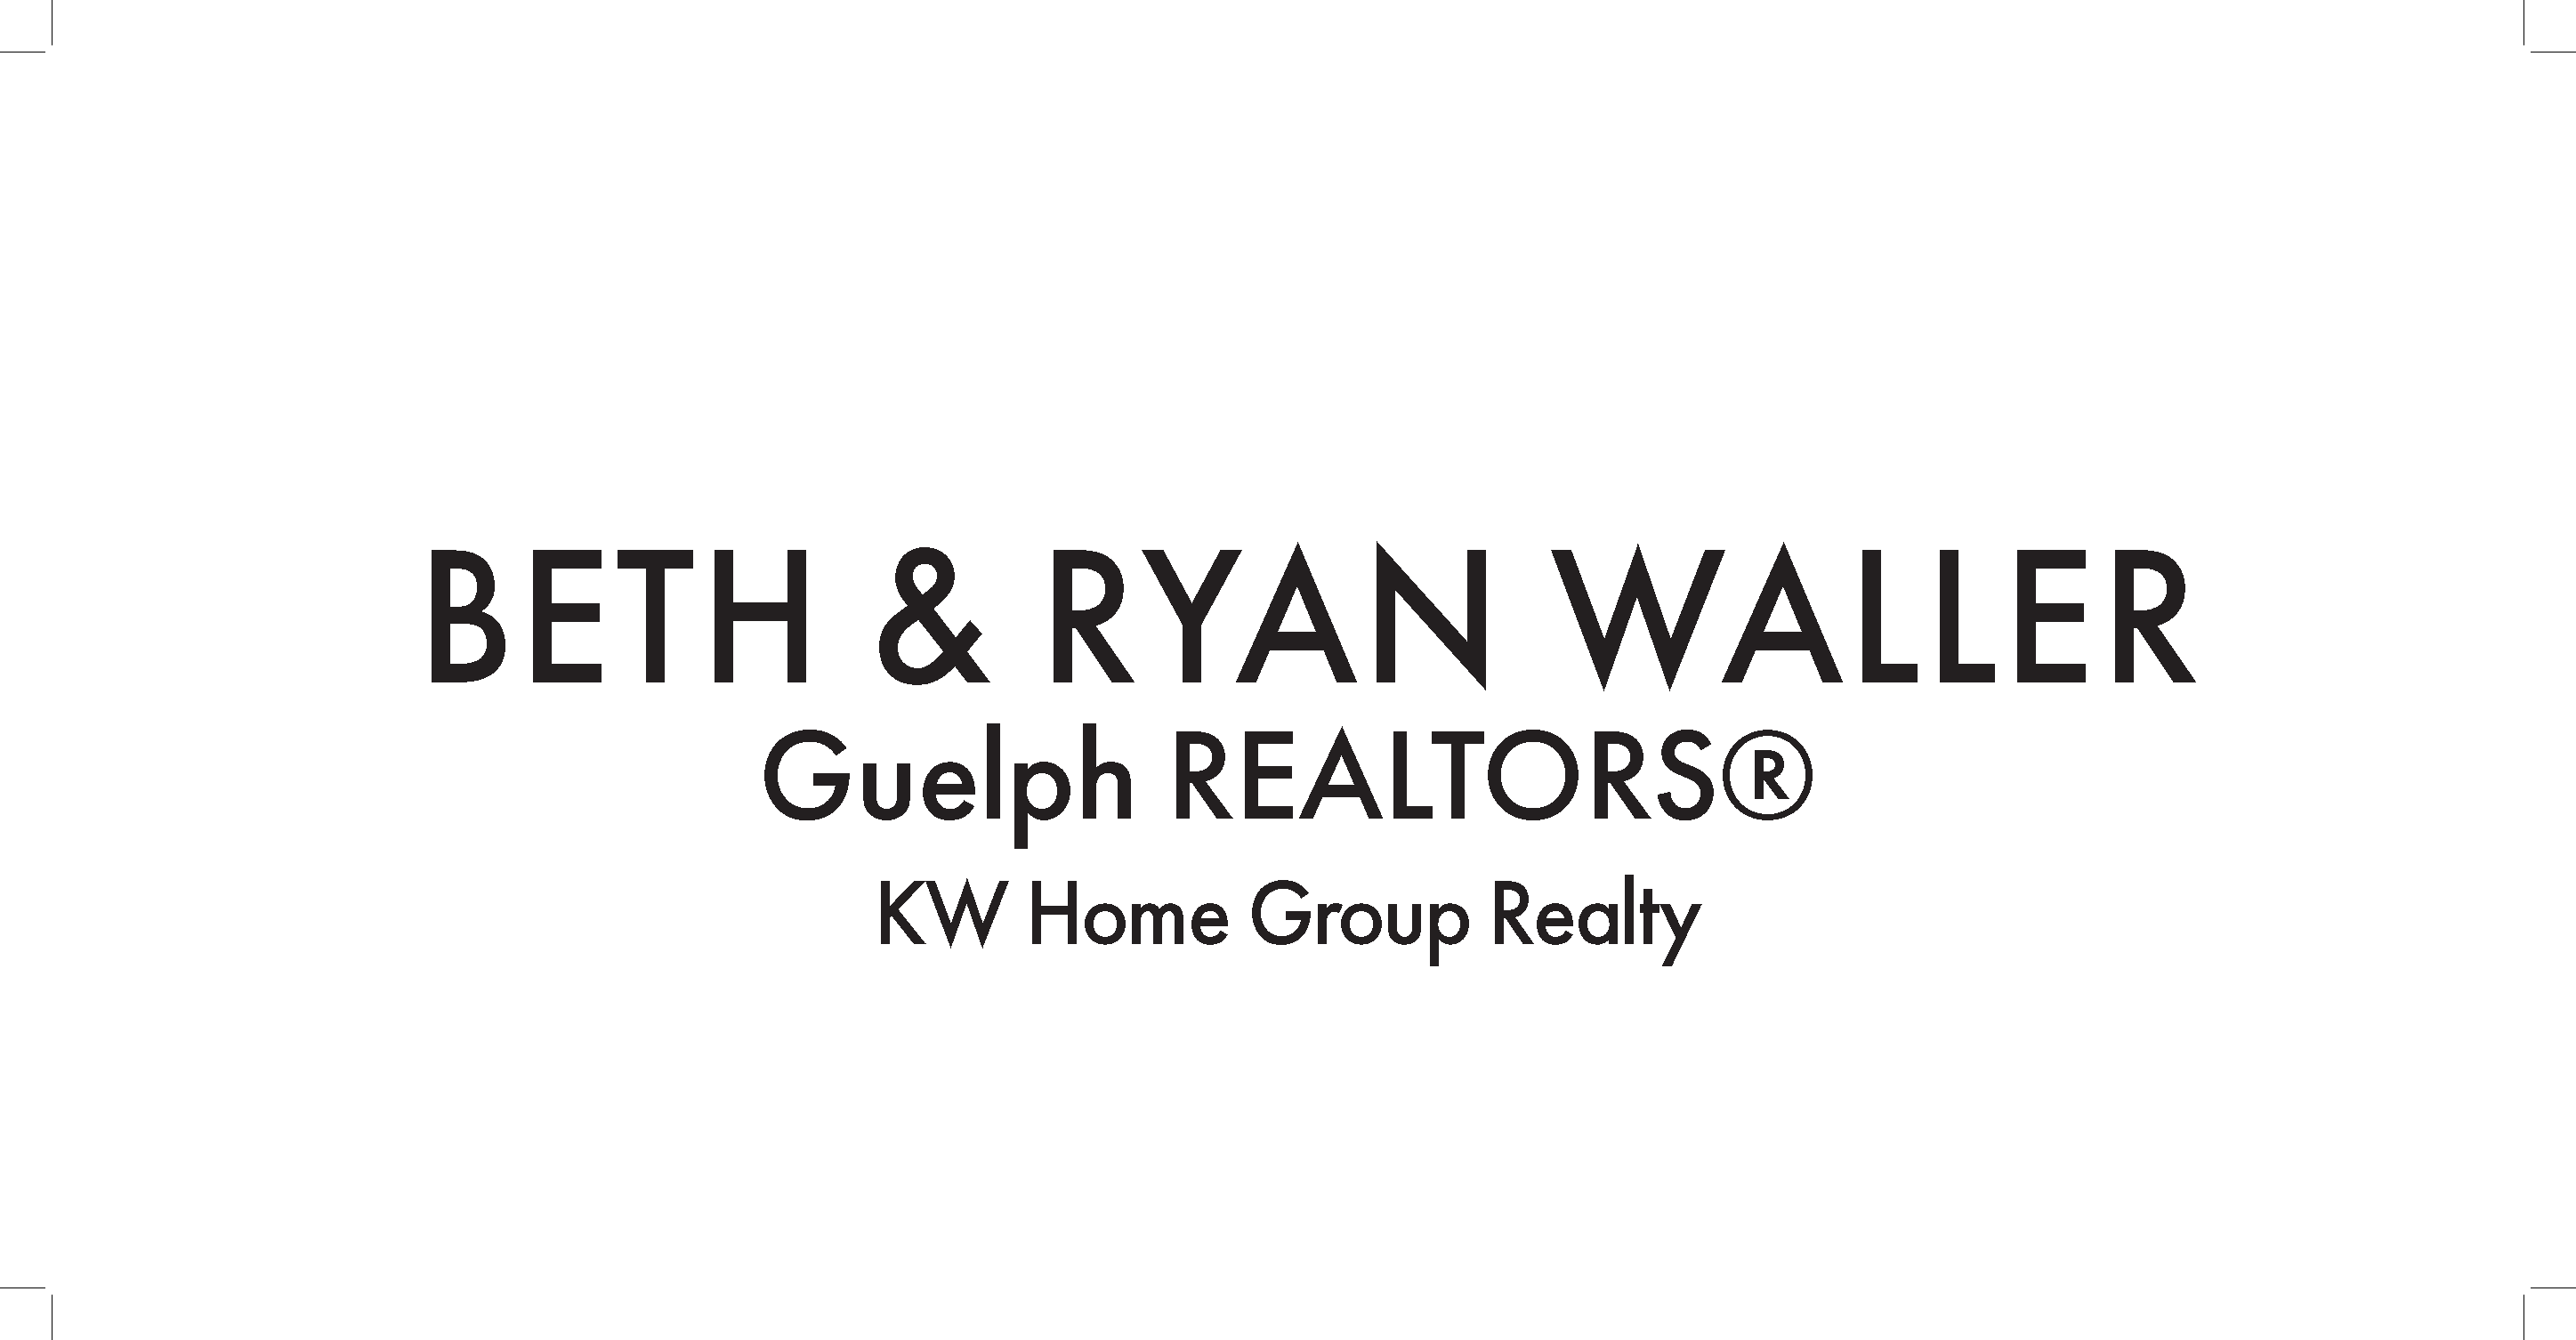 Beth & Ryan Waller - KW Home Group Realty